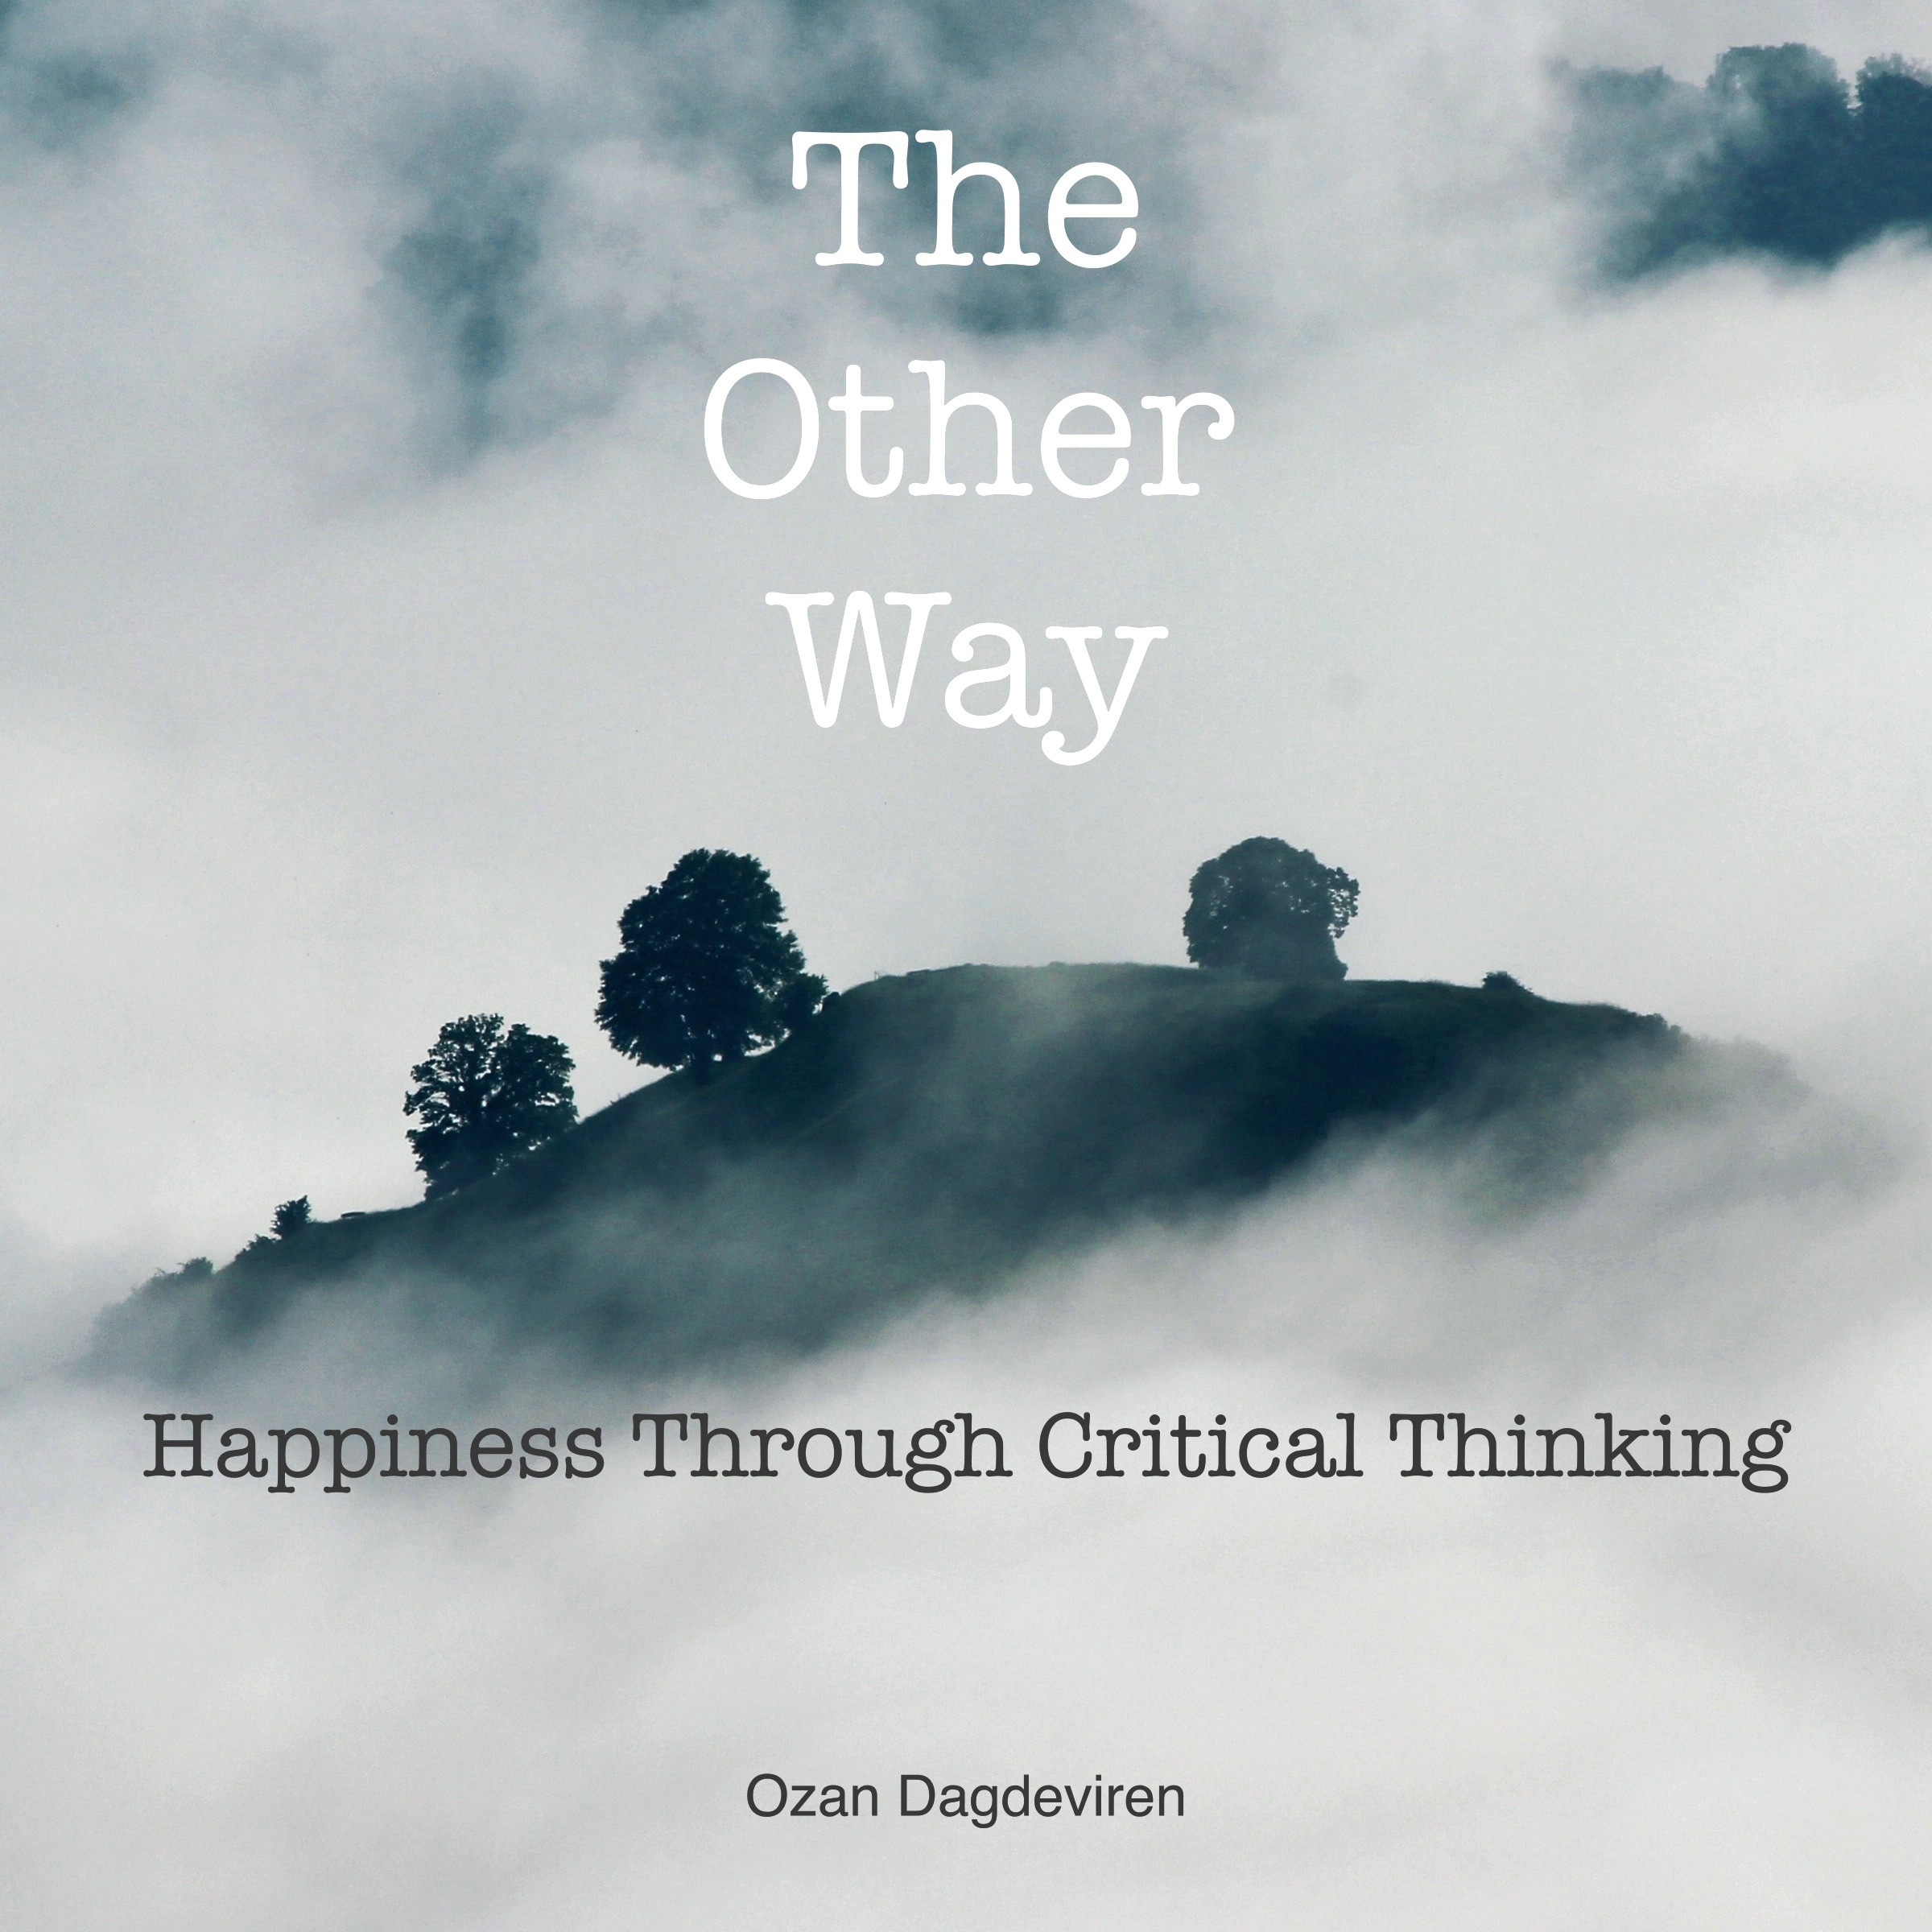 The Other Way: Happiness Through Critical Thinking Audiobook by Ozan Dagdeviren